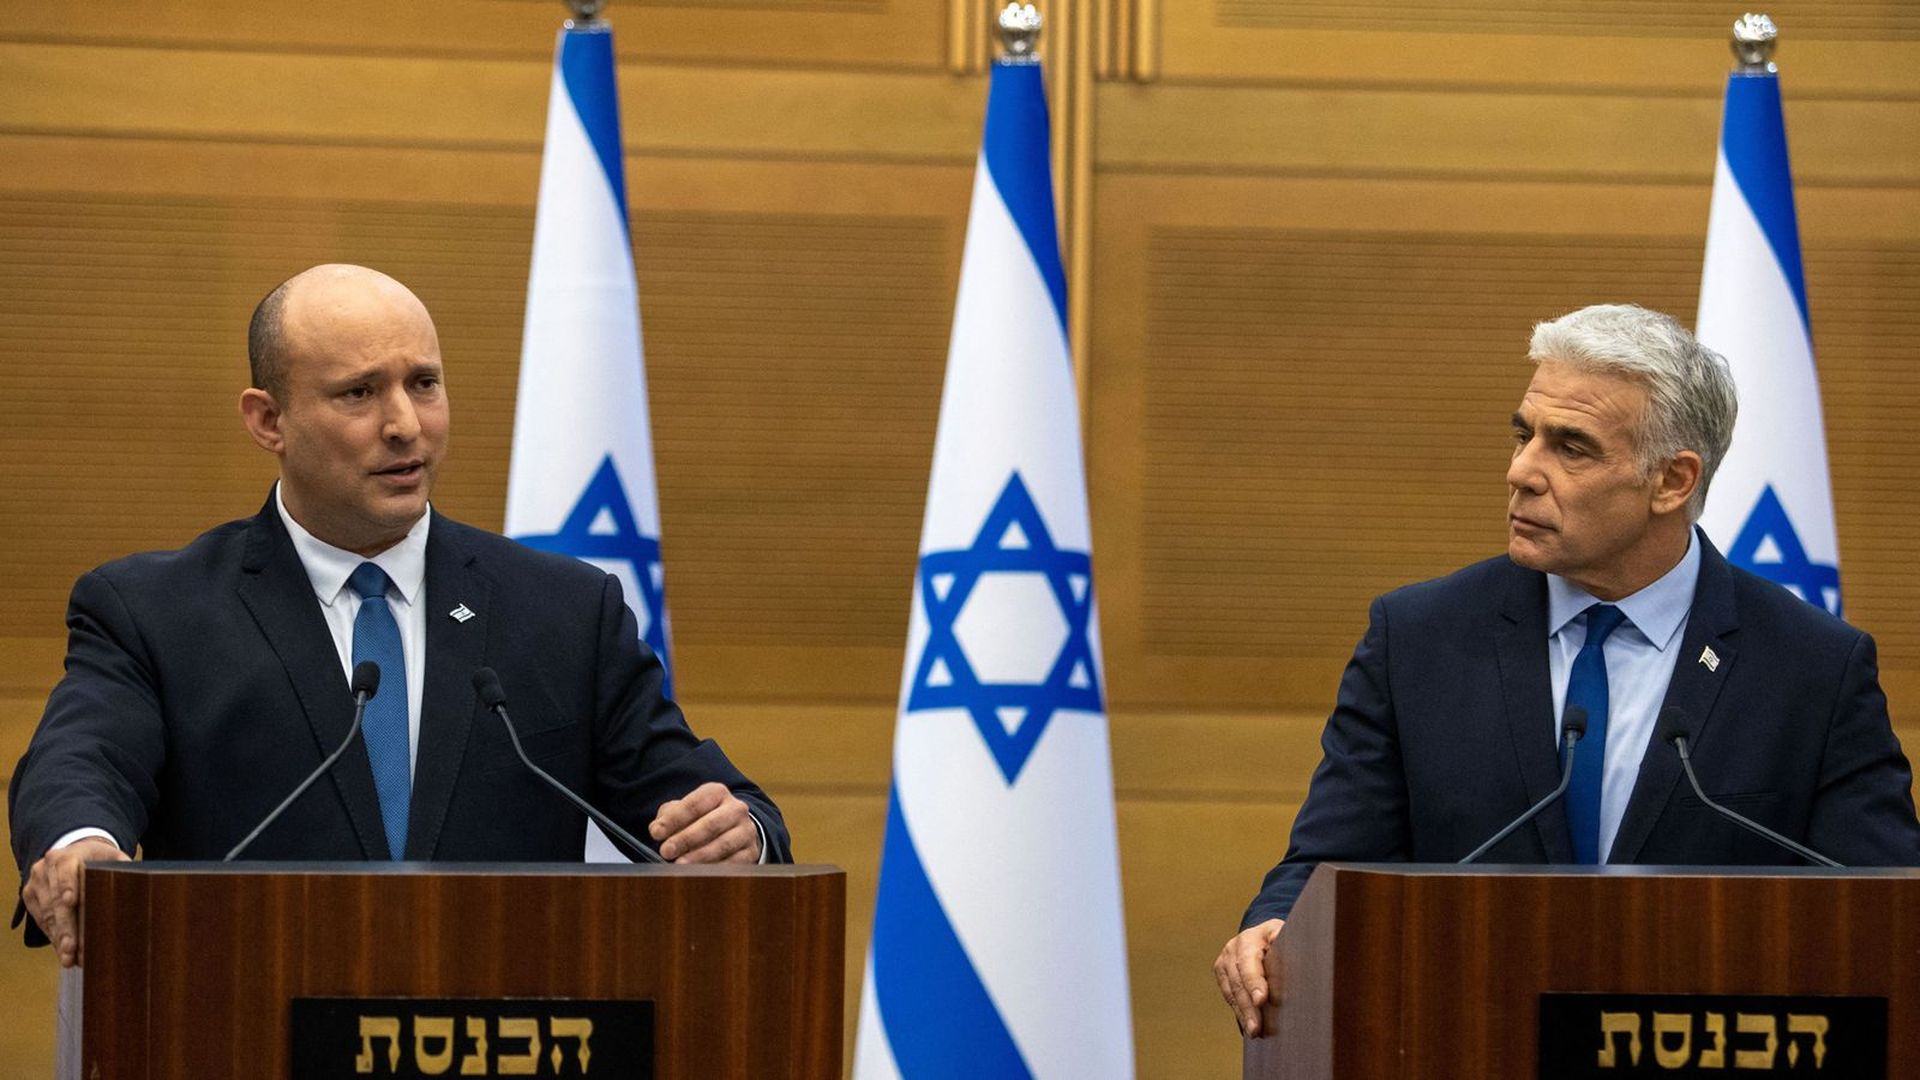 Naftali Bennett and Yair Lapid at a press conference on June 20. Photo: Oren Ben Hakoon/AFP via Getty Images